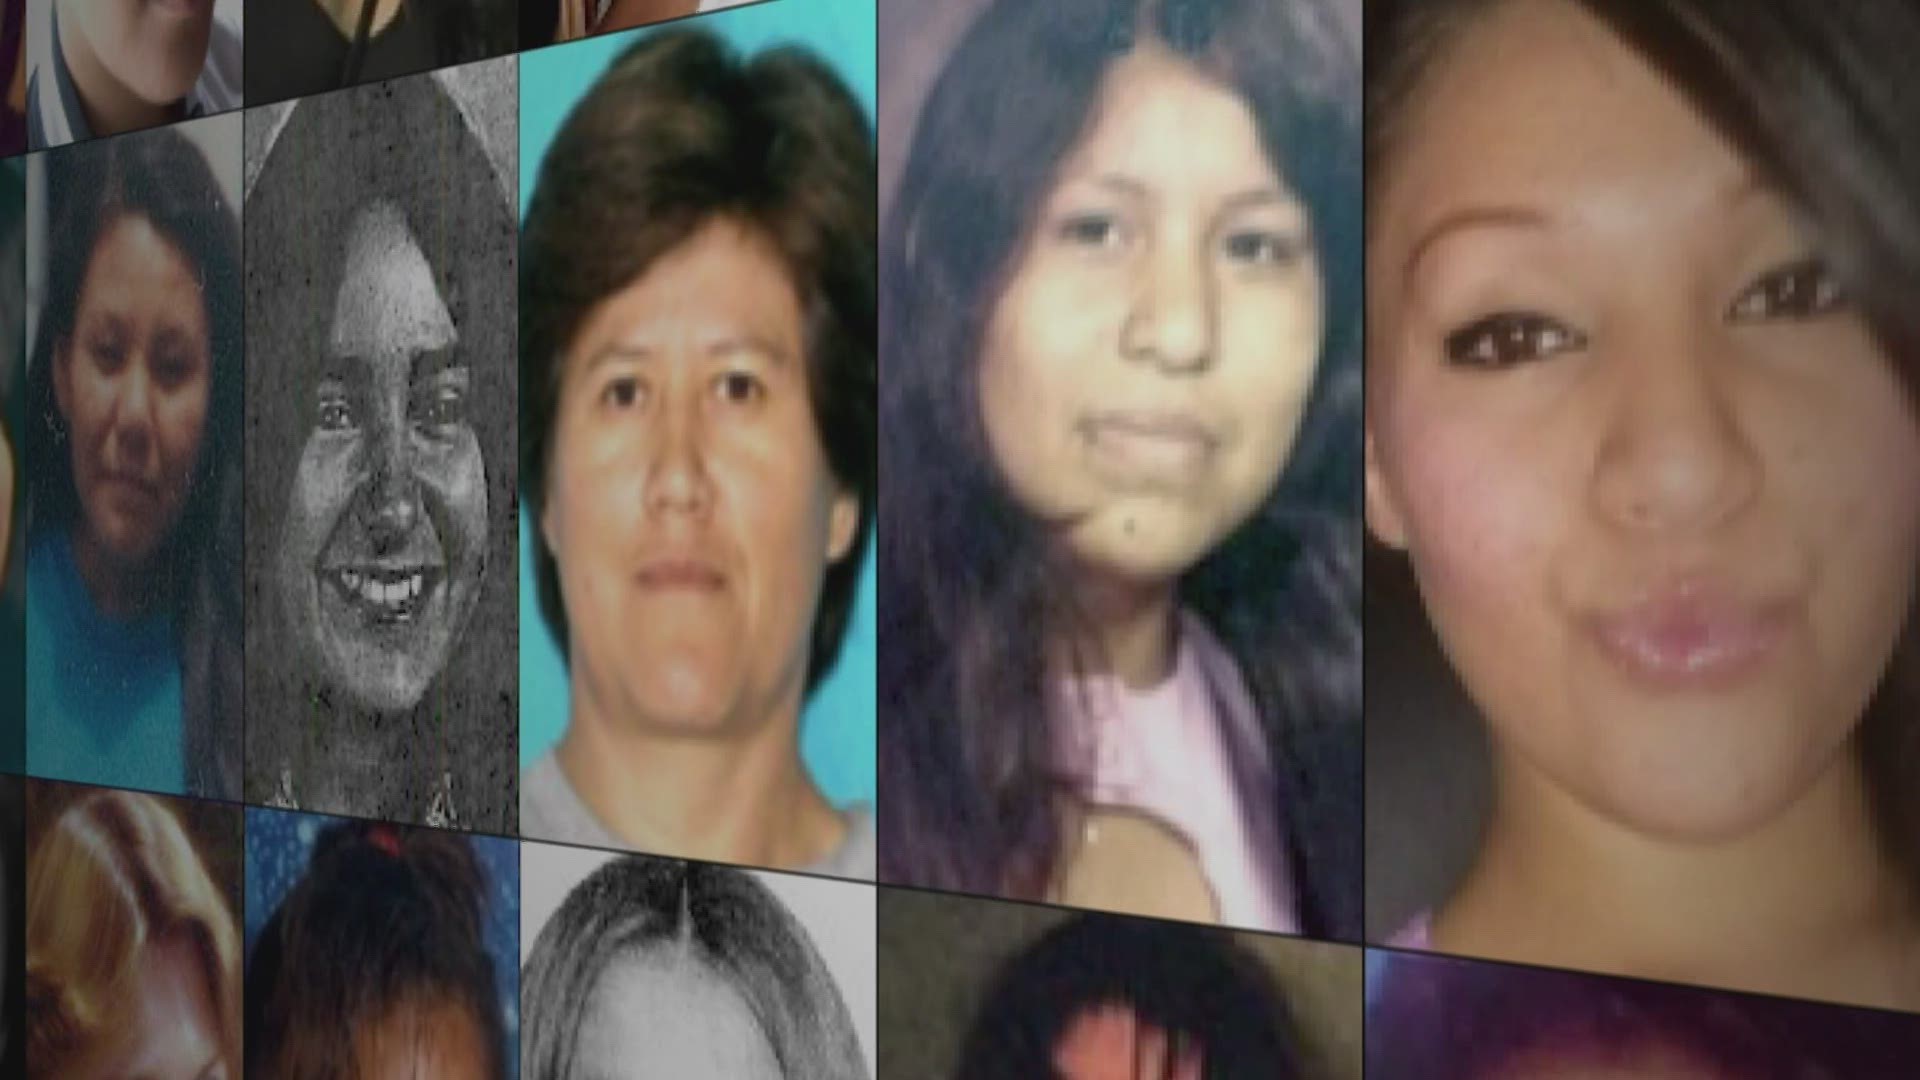 The Missing Indigenous Person Alert goes into effect on July 1. It is one of the first steps to address the Missing Indigenous Women and People crisis in Washington.